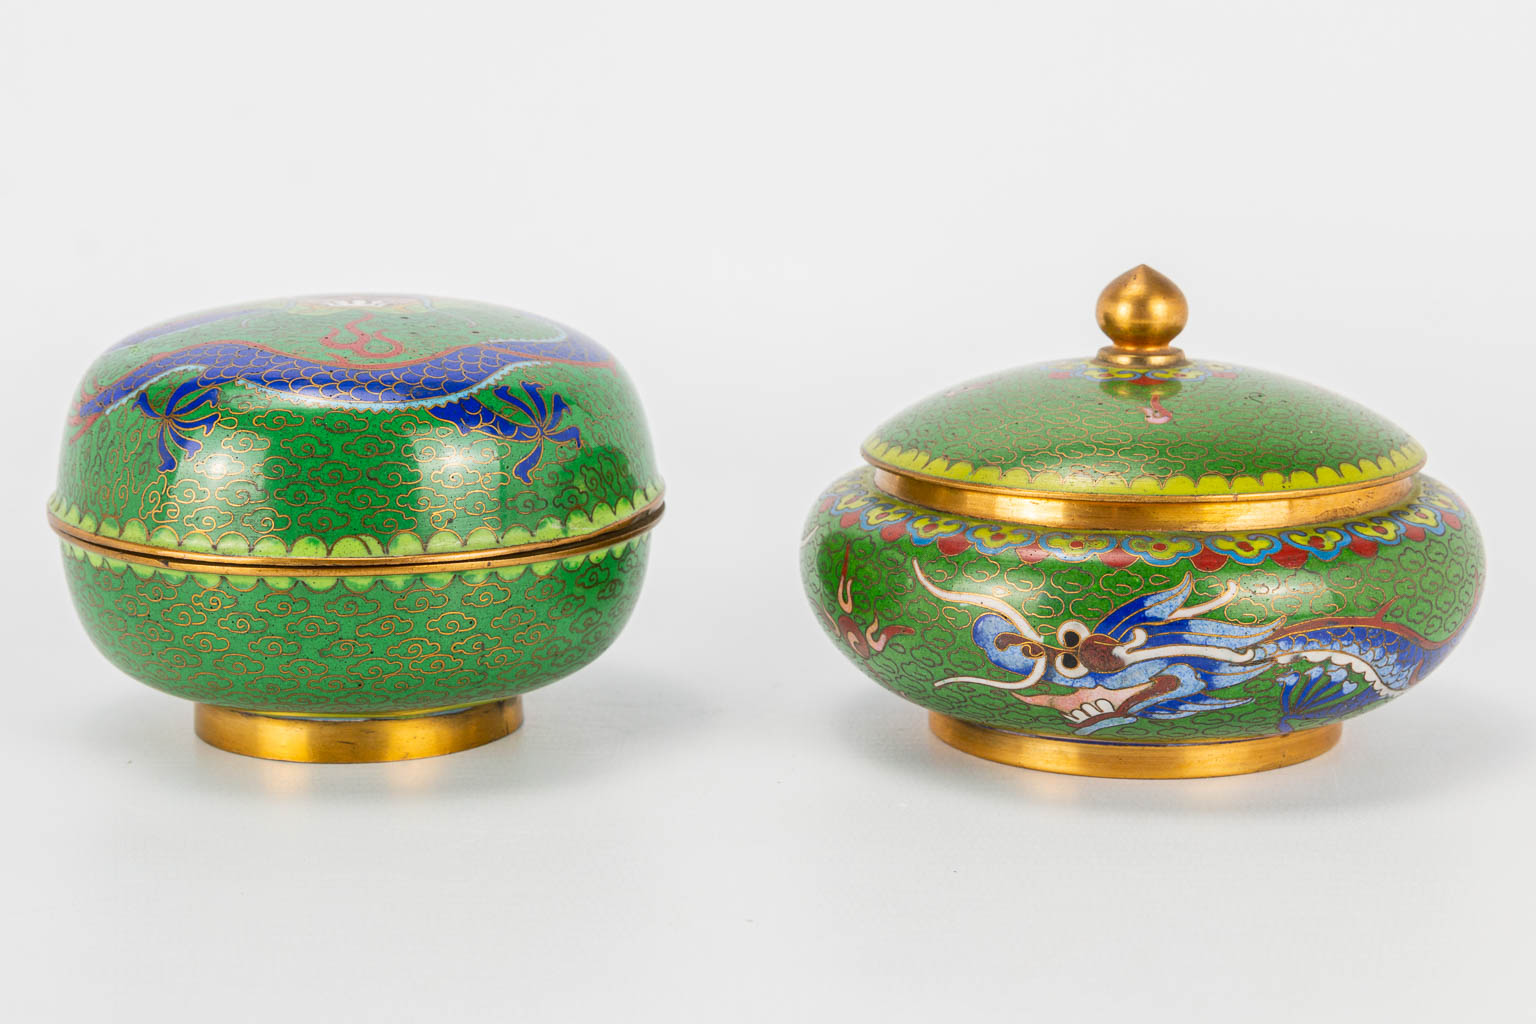 A collection of 2 jars and 2 candlesticks made of cloisonne bronze. (7 x 10 cm) - Image 8 of 16